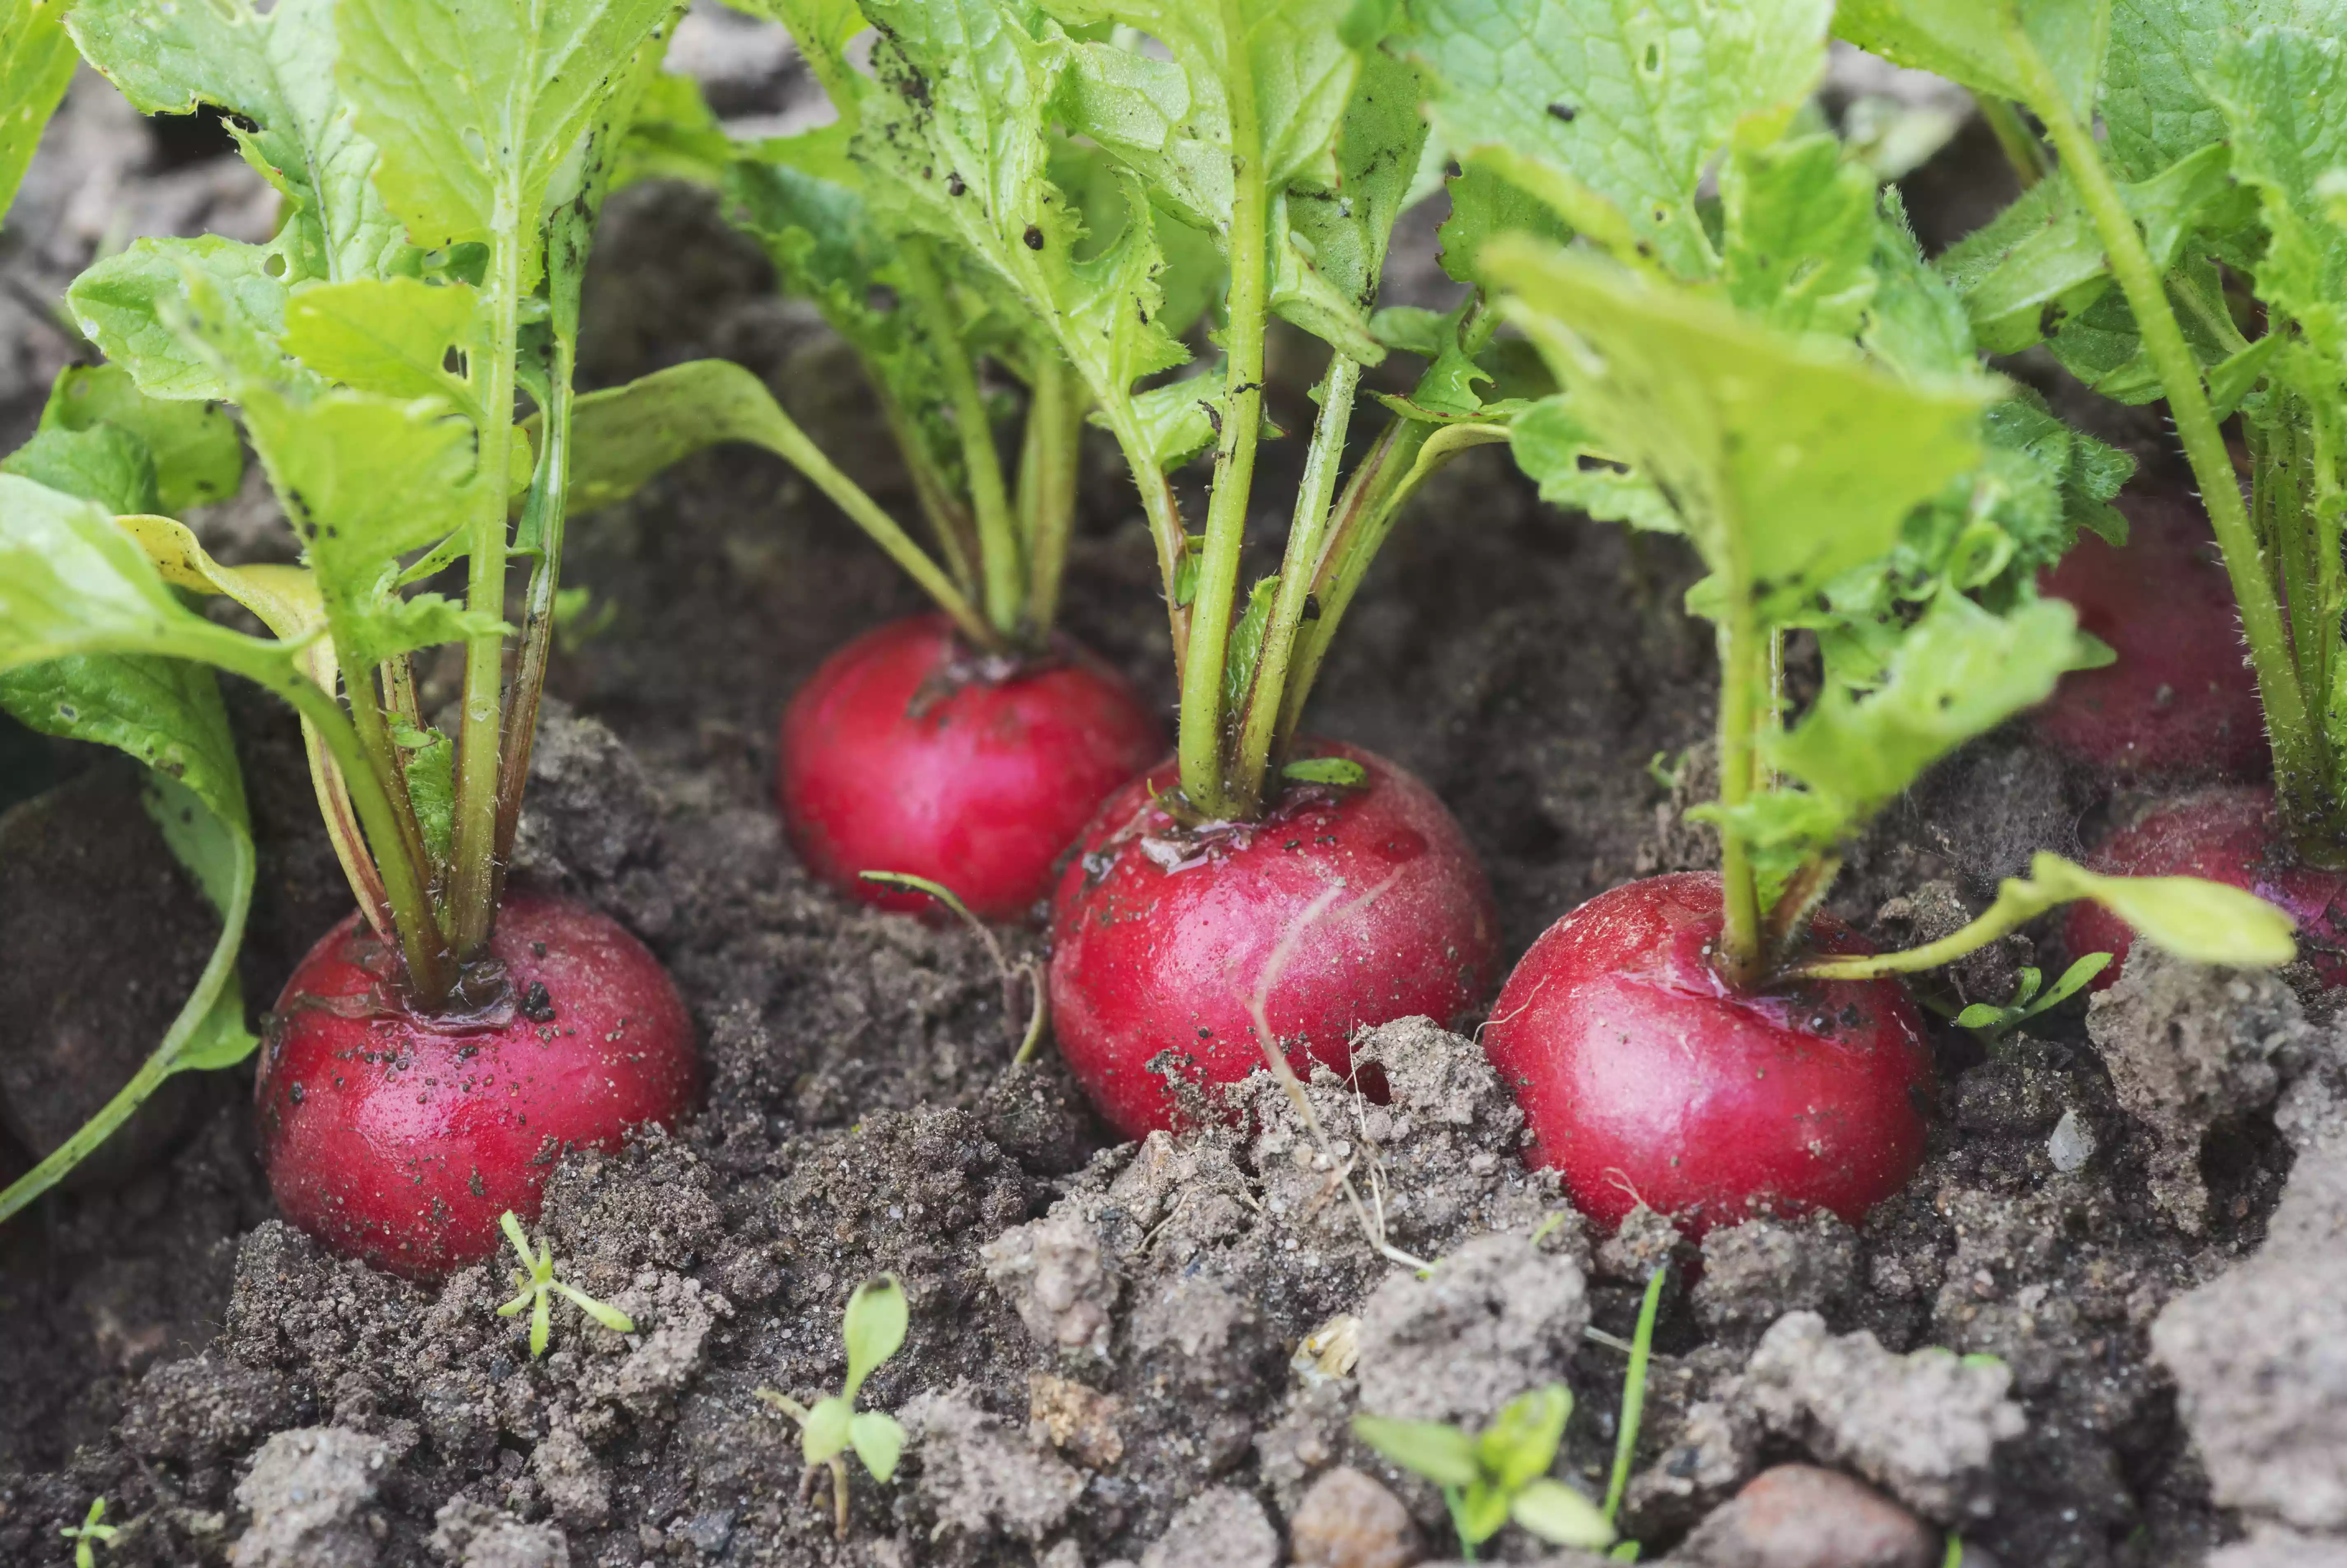 Close-up view of radishes half buried in soil